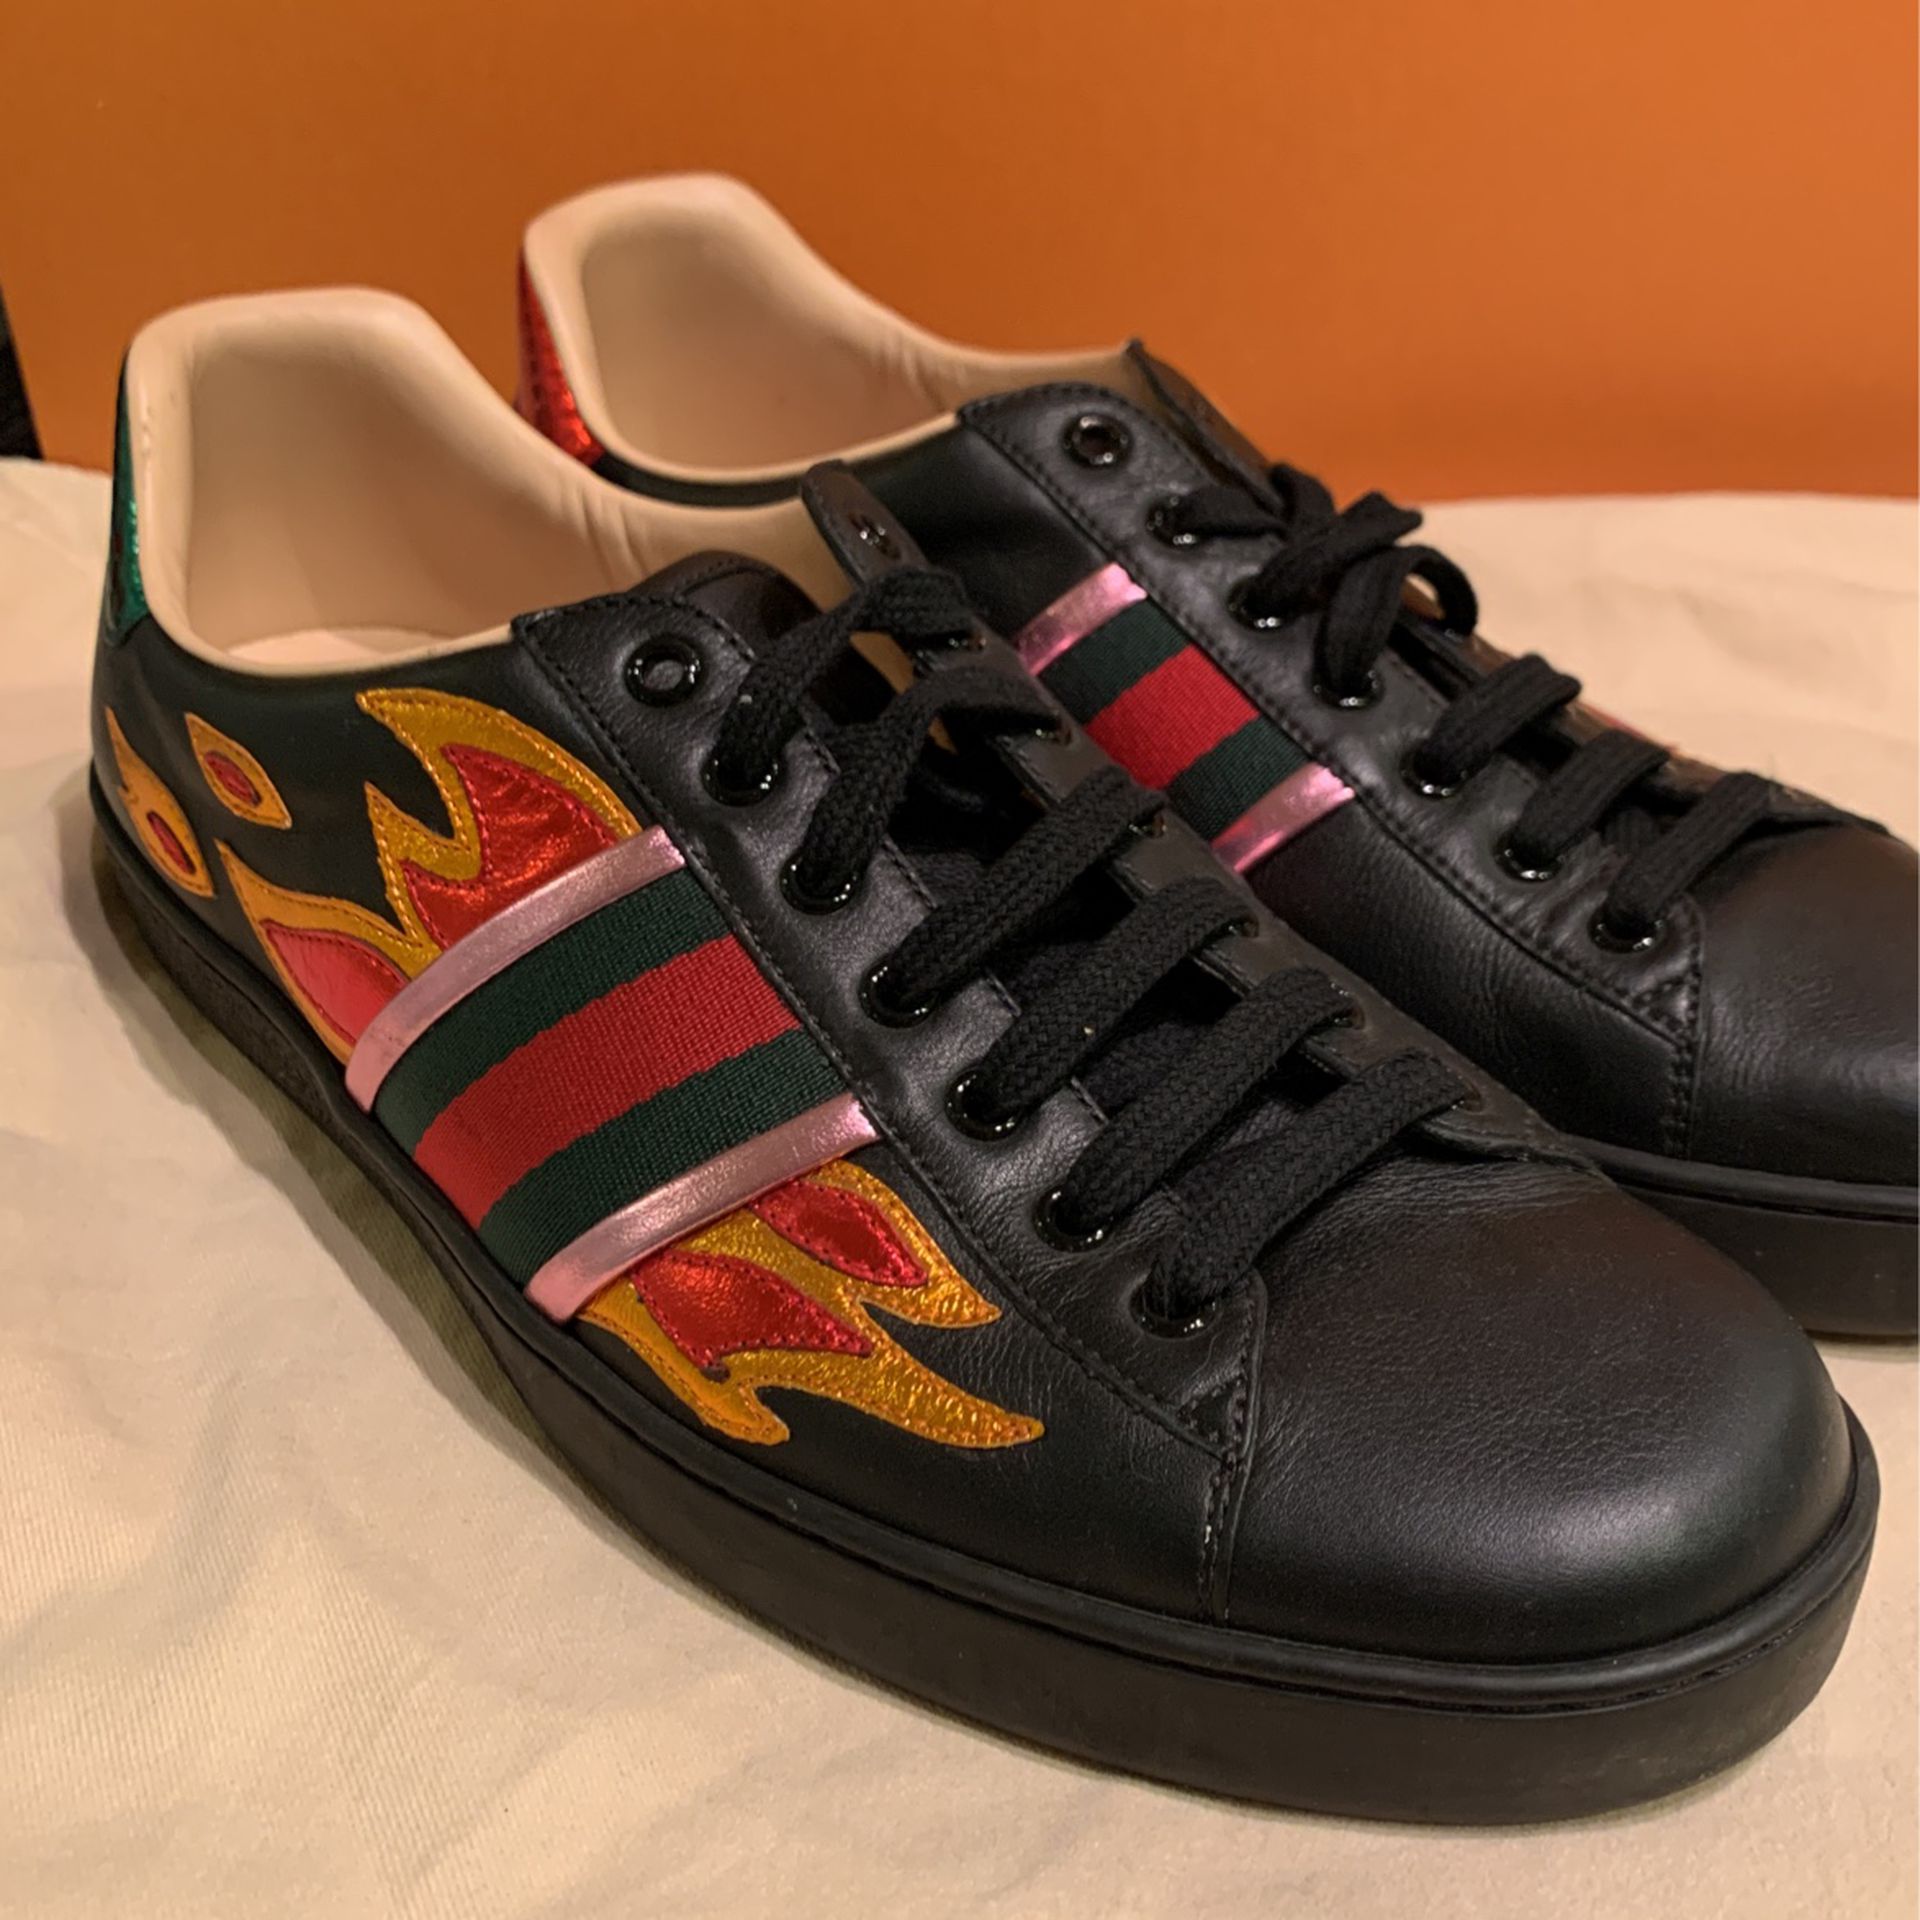 Gucci Flame New Ace for Sale in Yorba Linda, CA - OfferUp